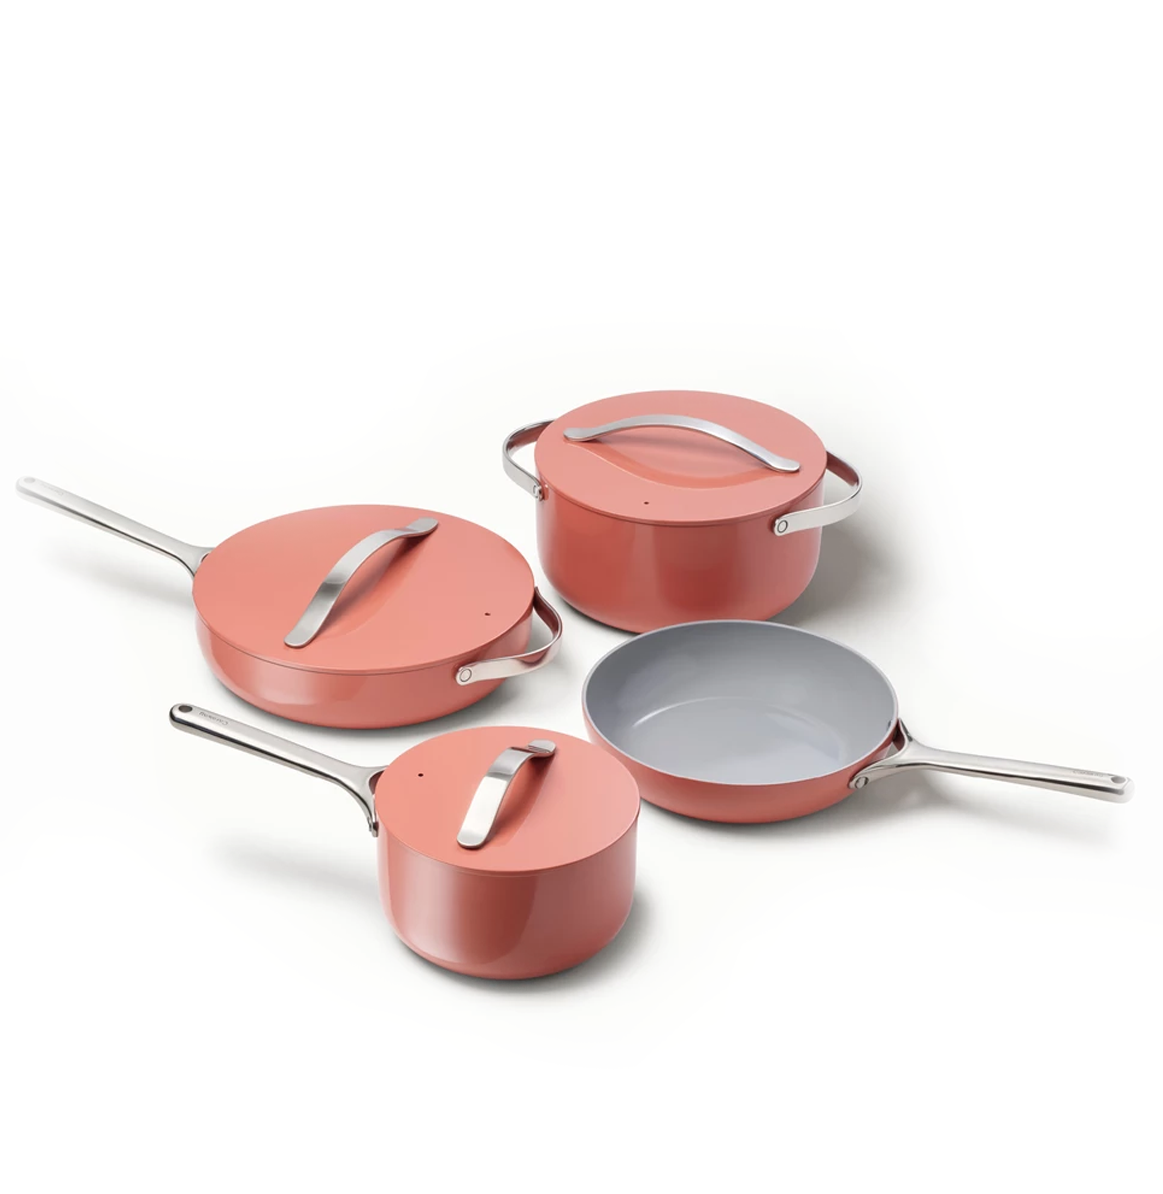 caraway cookware set, one of the best valentine's day gifts for couples